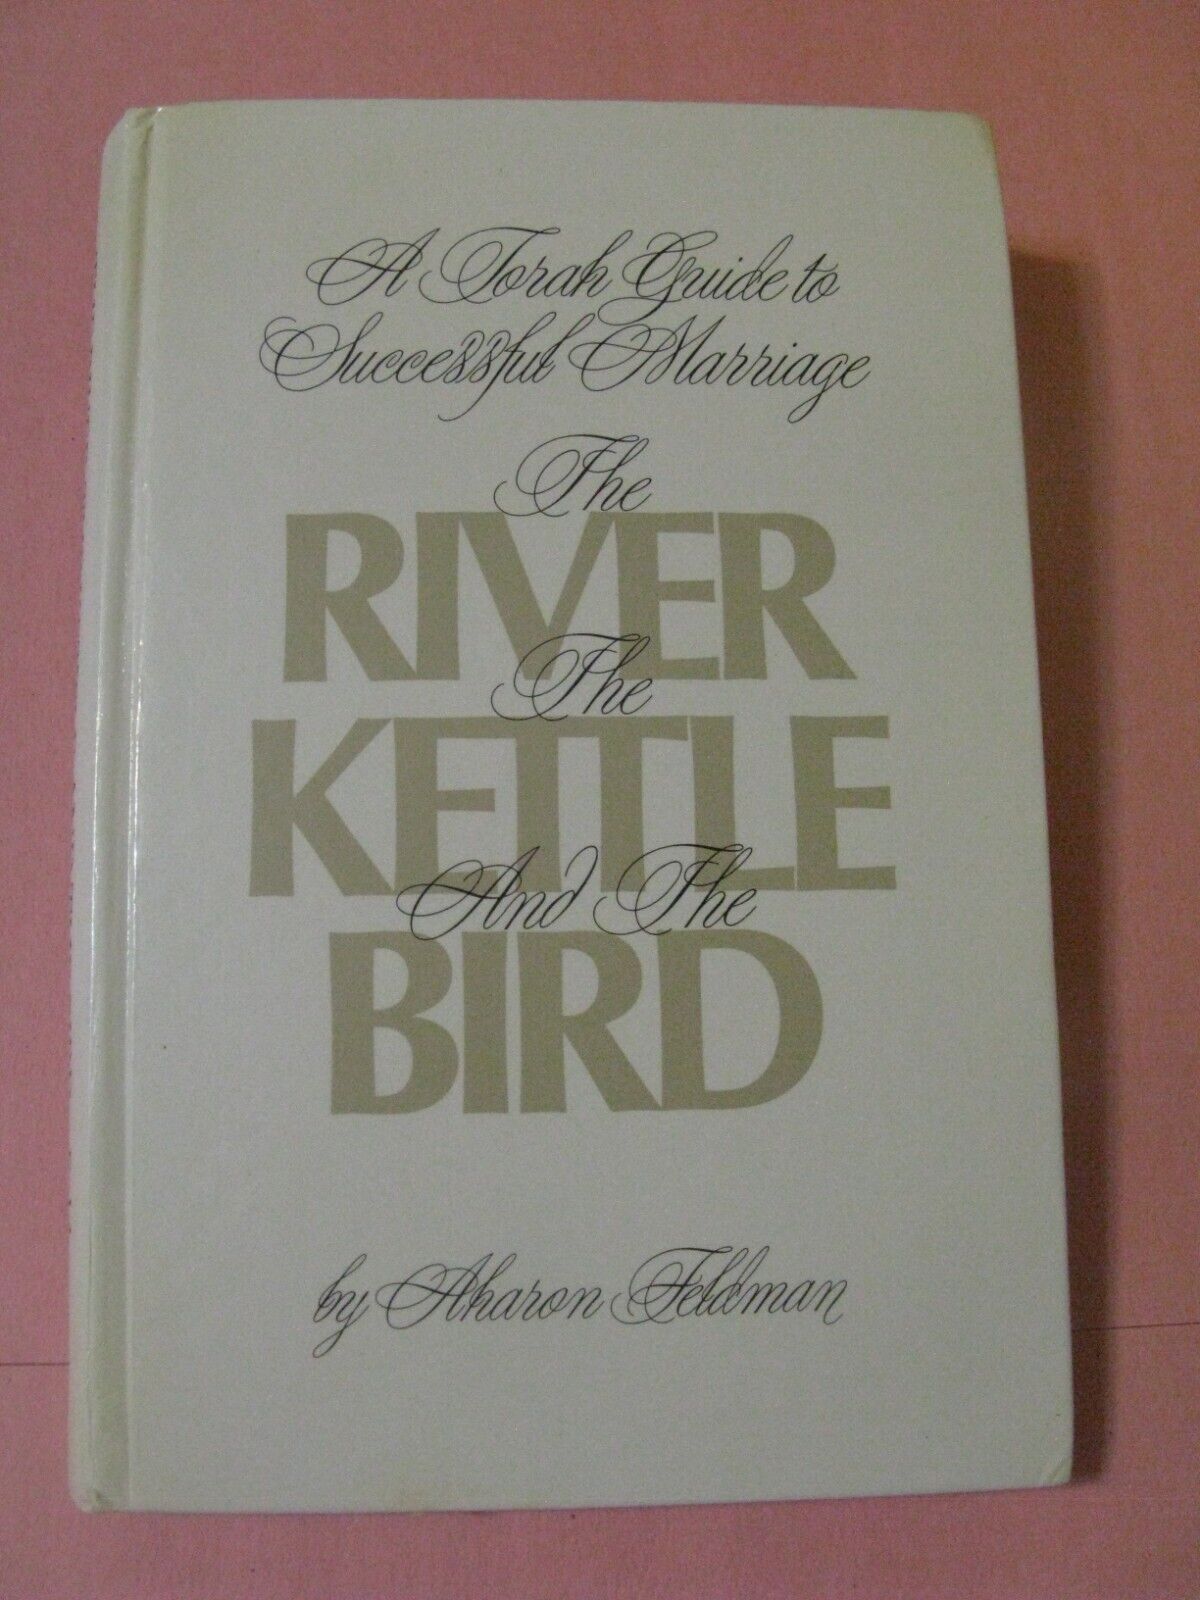 The River The Kettle And The Bird Aharon Feldman Classic Work On Love & Marriage